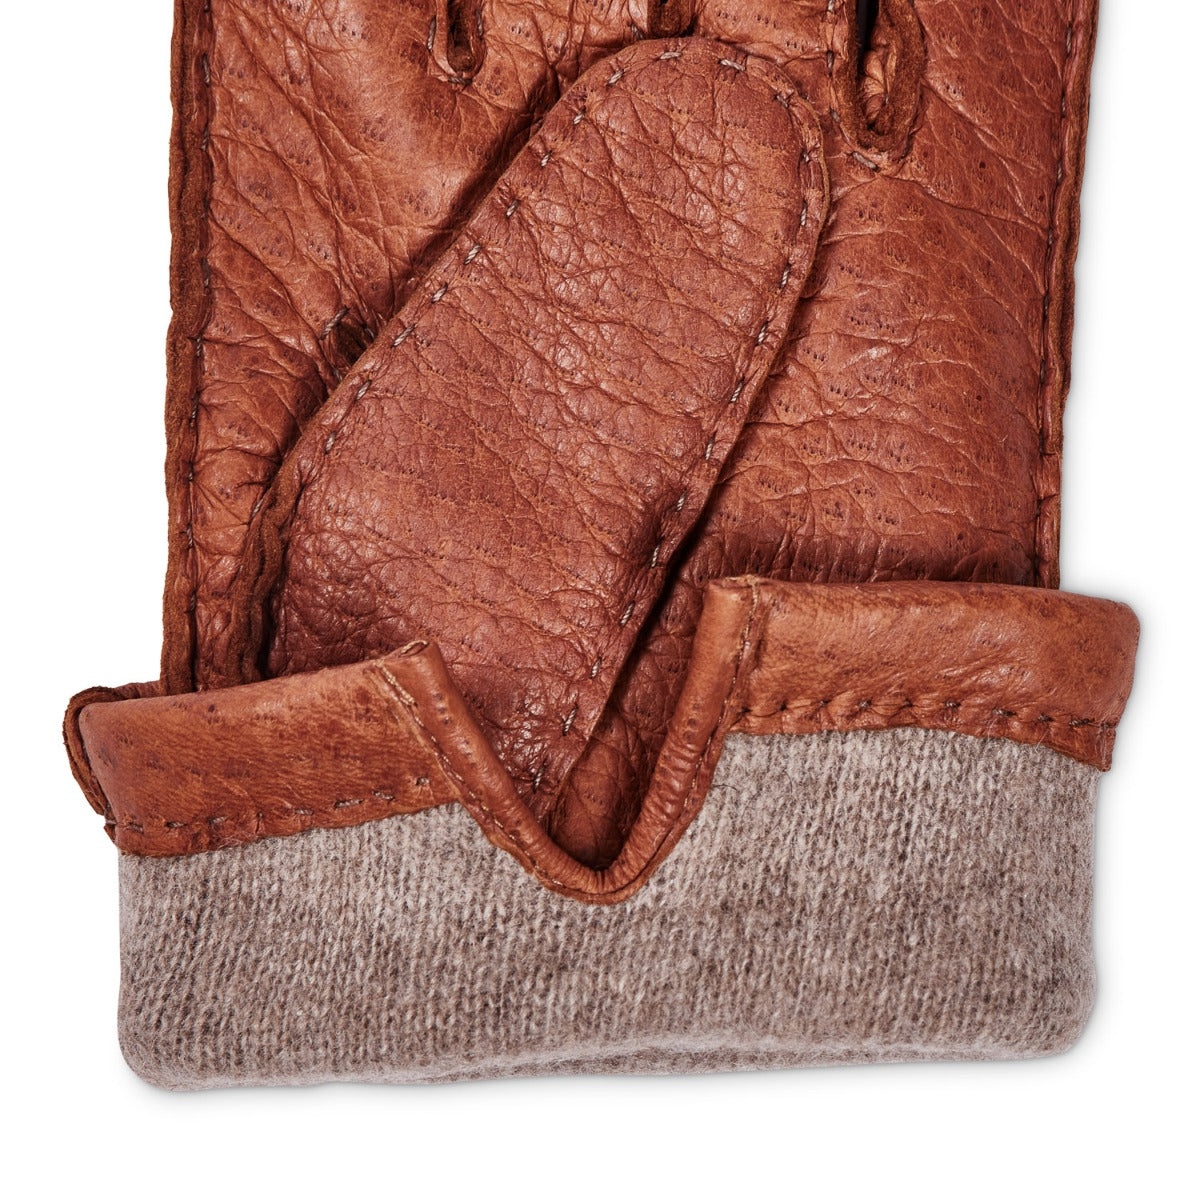 Sovereign Grade Medium Brown Peccary Leather Gloves, Cashmere Lined